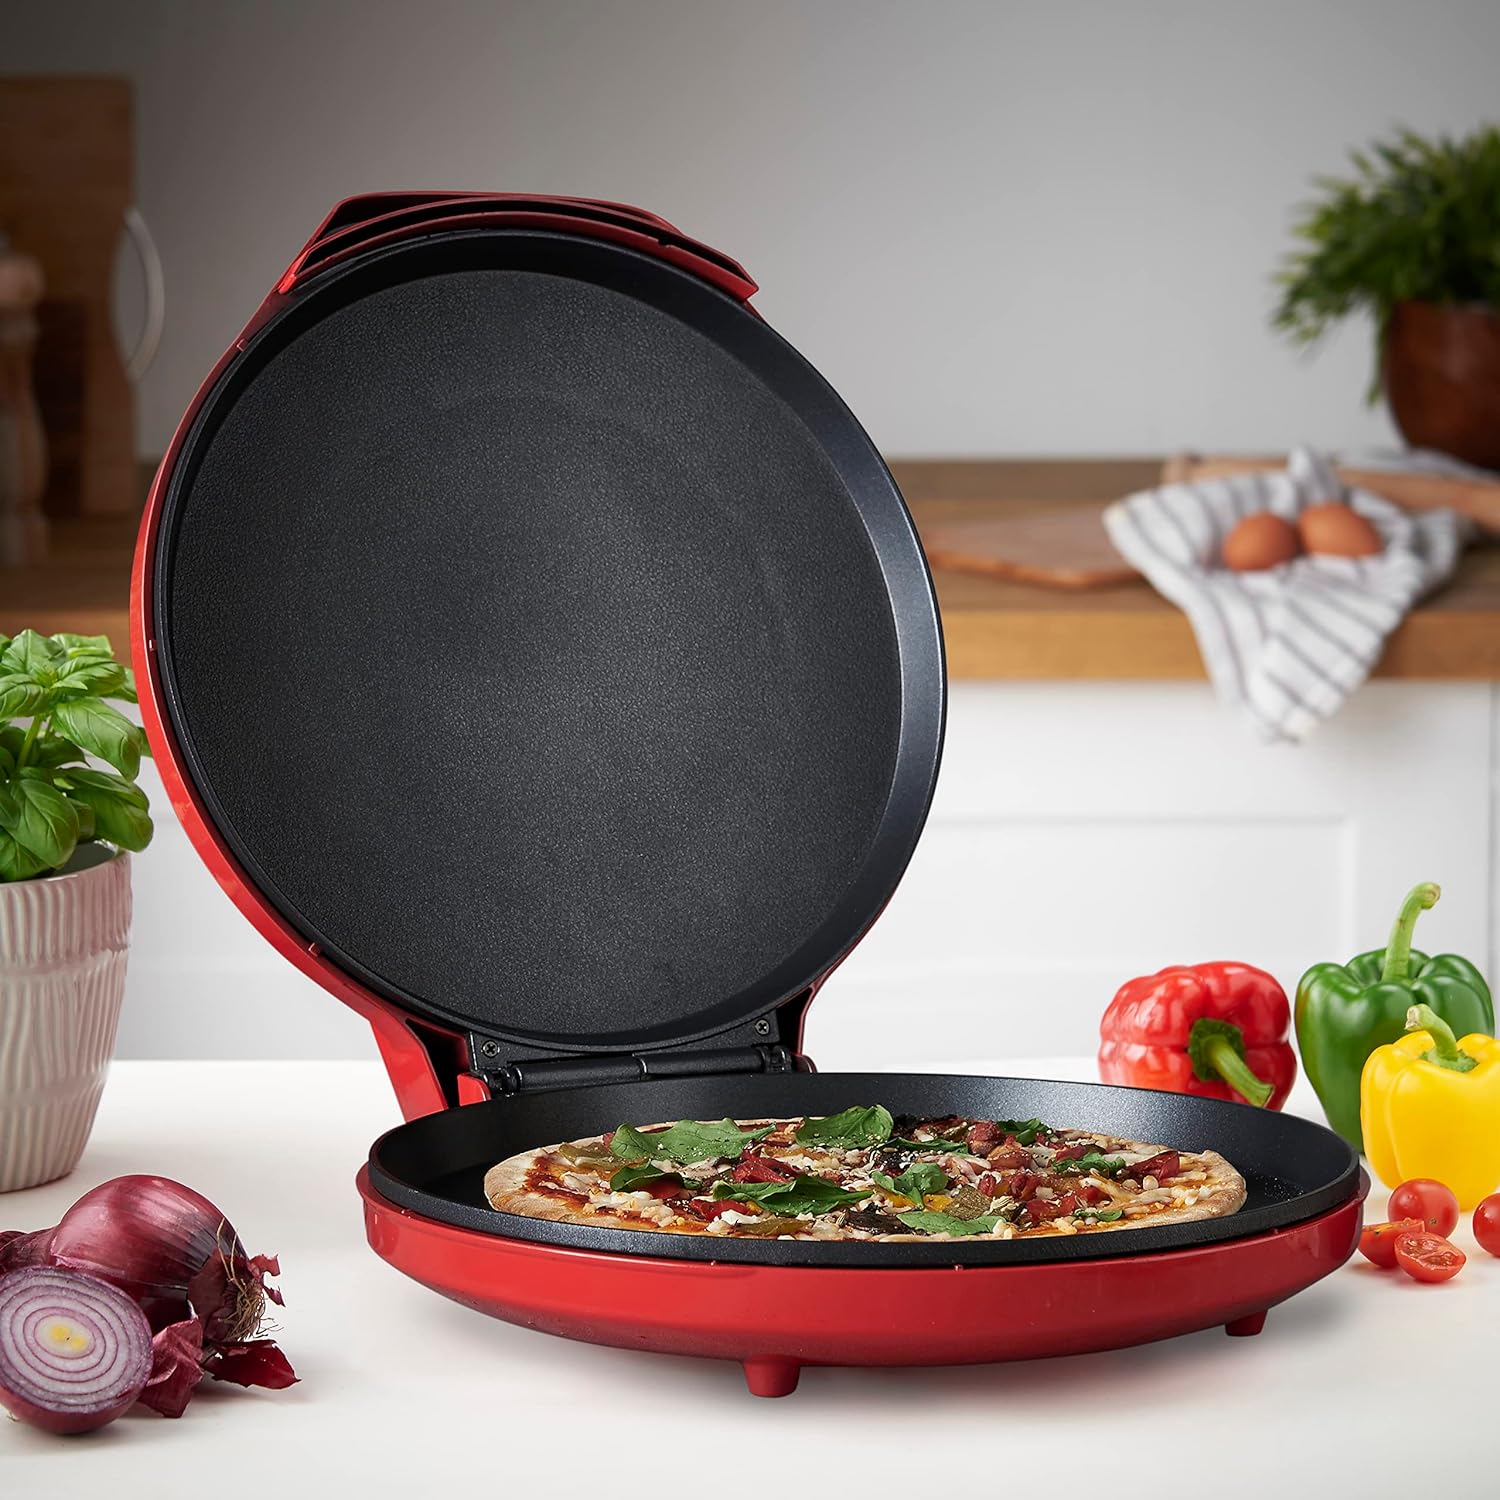 MisterChef Electric Pizza Maker 1400W, Indoor Portable Pizza Oven, Crepe, Pancake and Omelette Maker, 12 Inch / 30cm, Energy Efficient, Free Recipe Book Enclosed, 2 Year Warranty